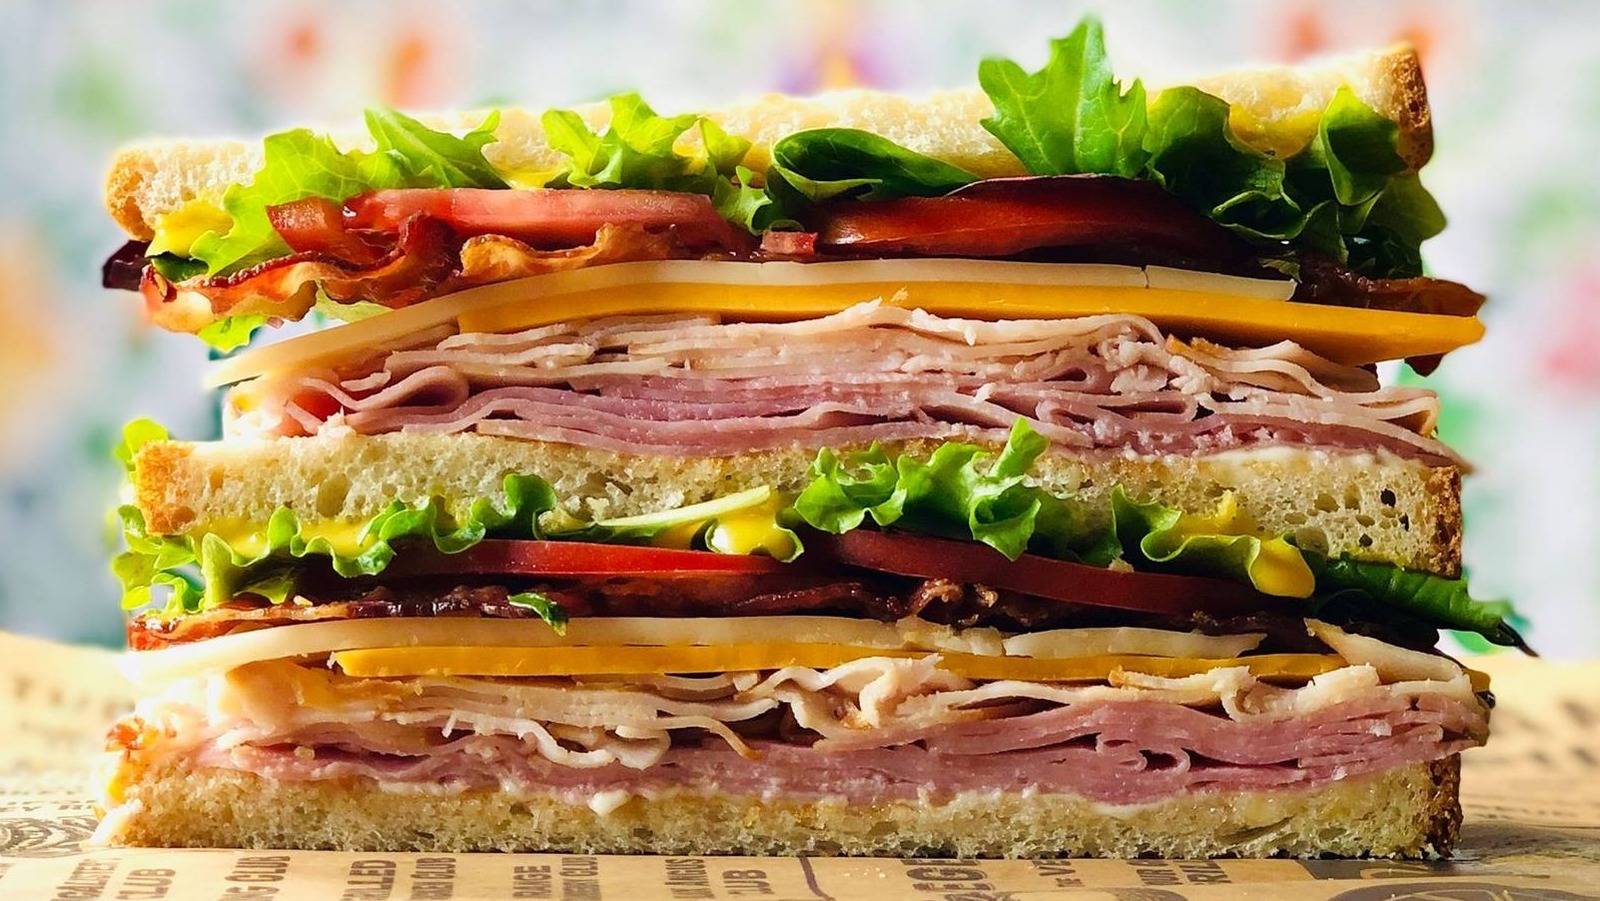 https://www.thedailymeal.com/img/gallery/a-beginners-guide-to-eating-at-mcalisters-deli/l-intro-1670455057.jpg